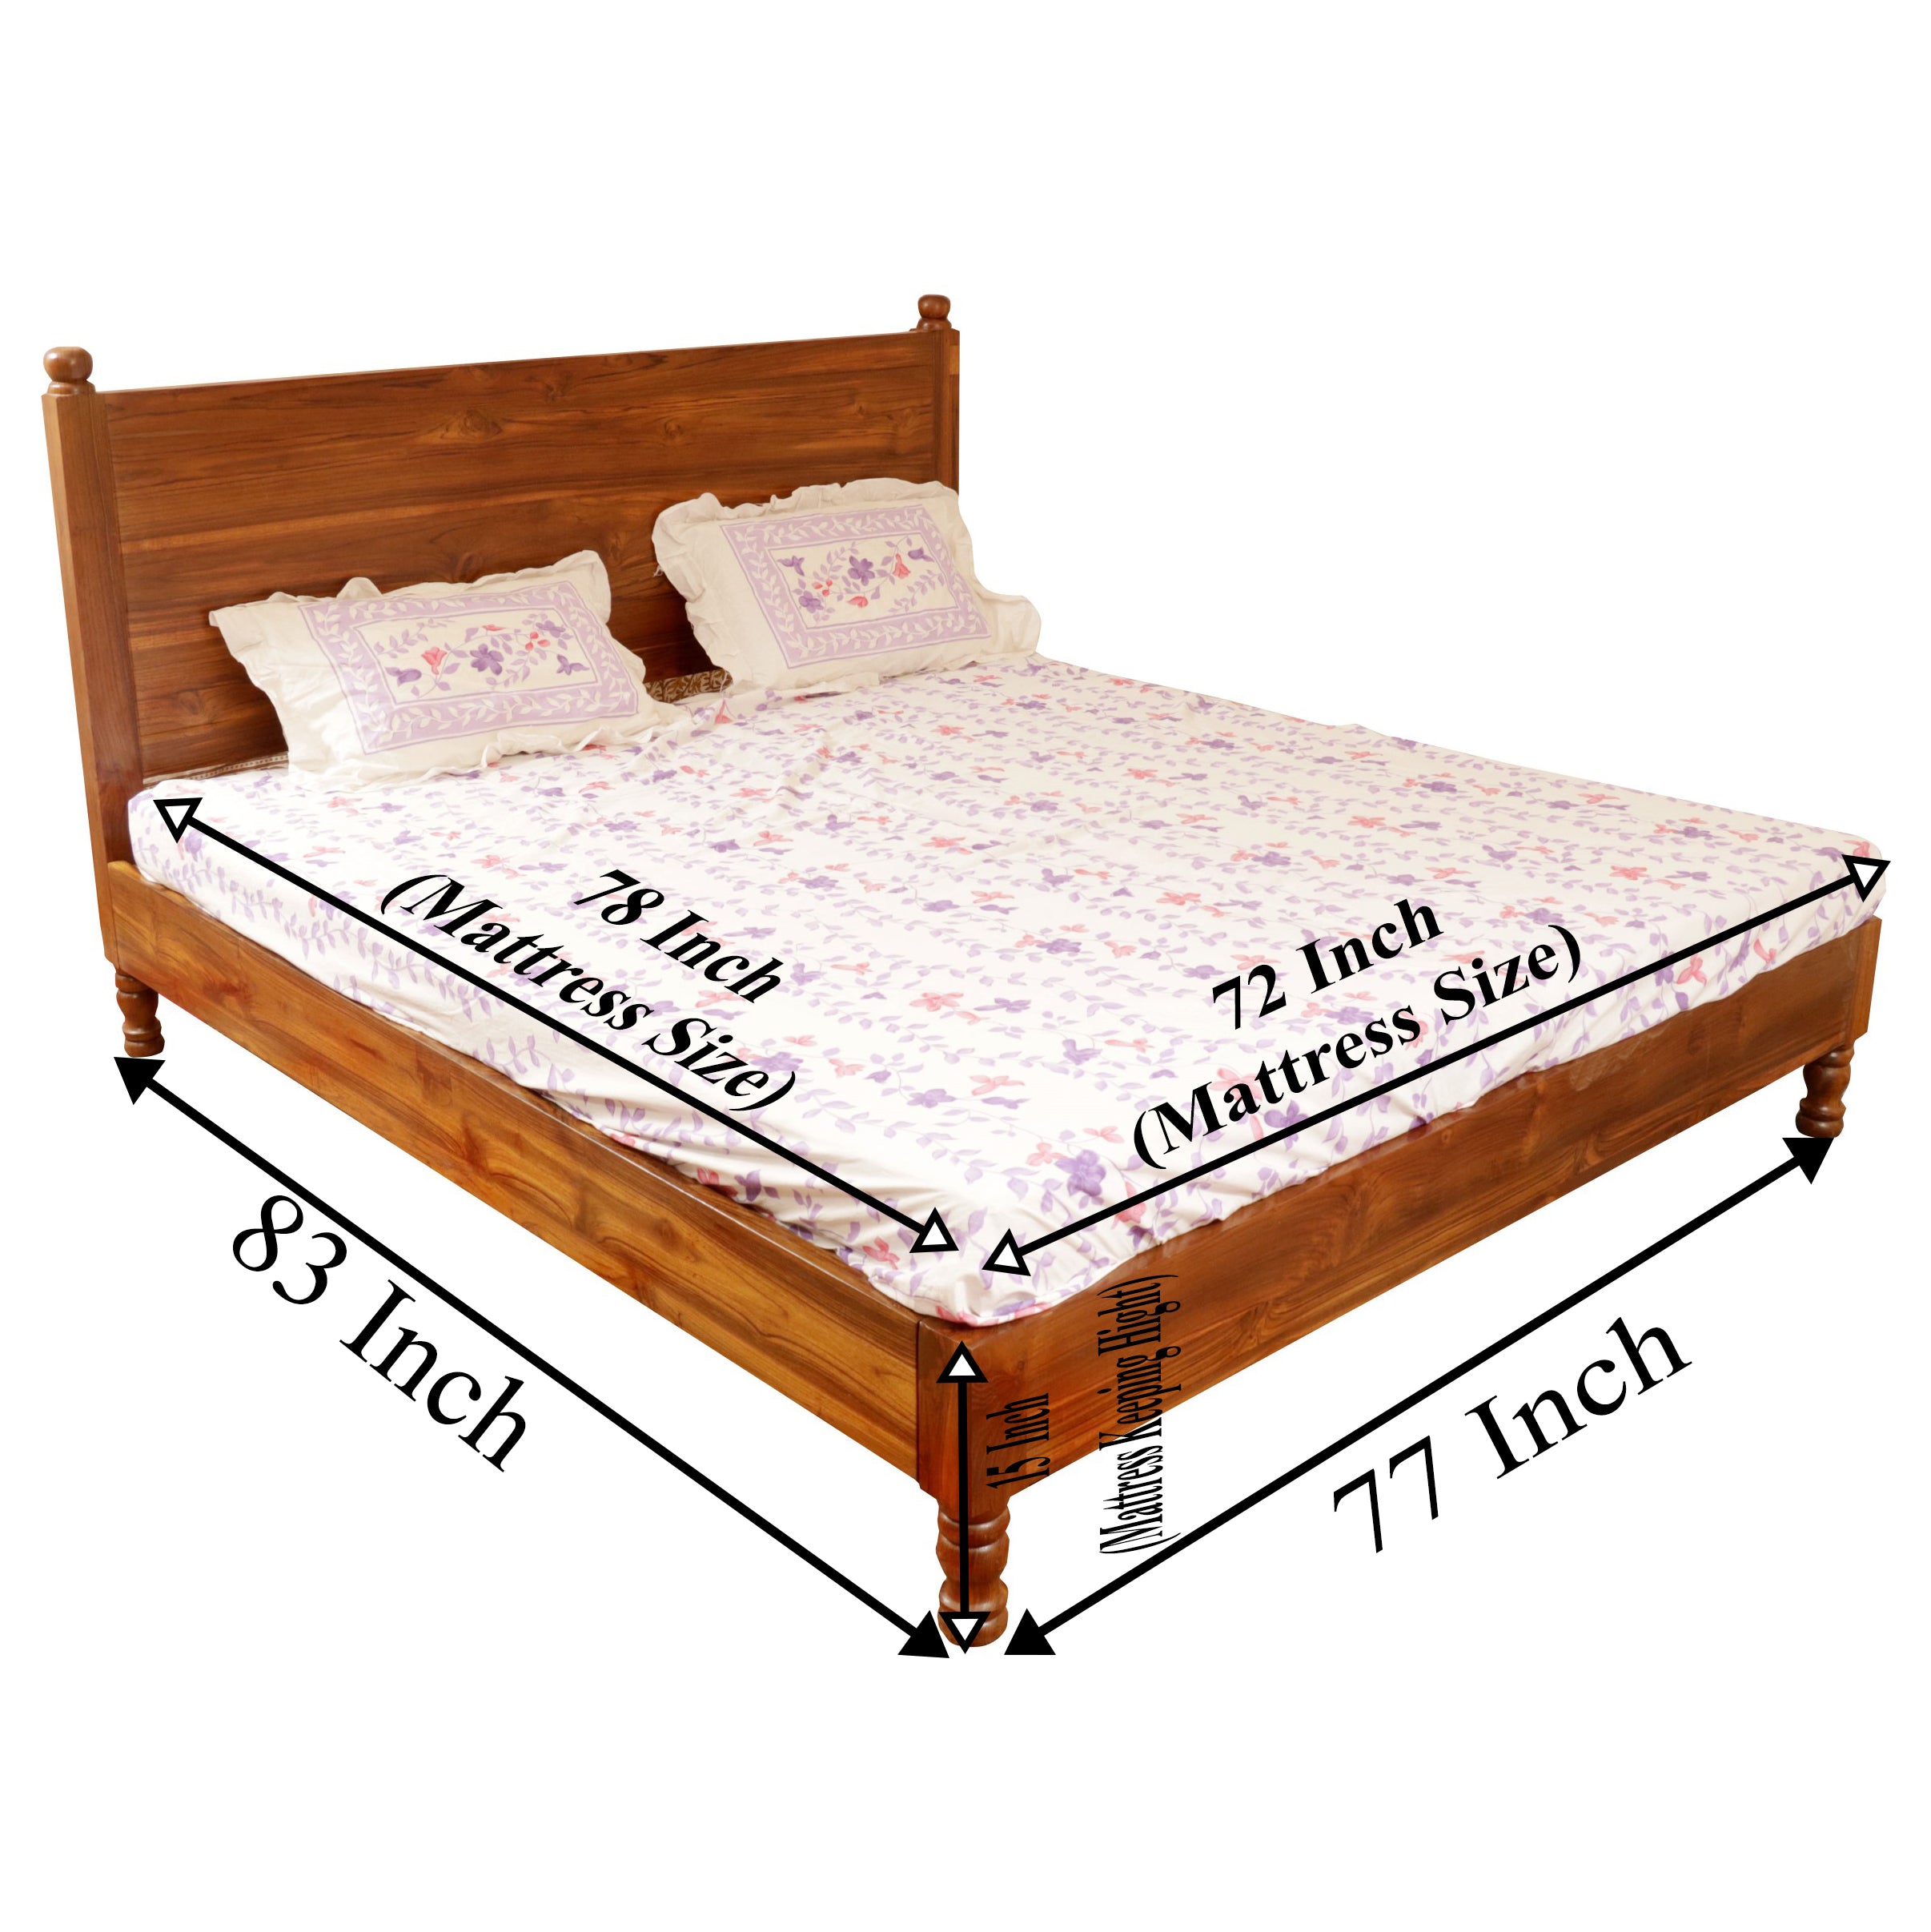 wood natural tone Classical Bed Bed